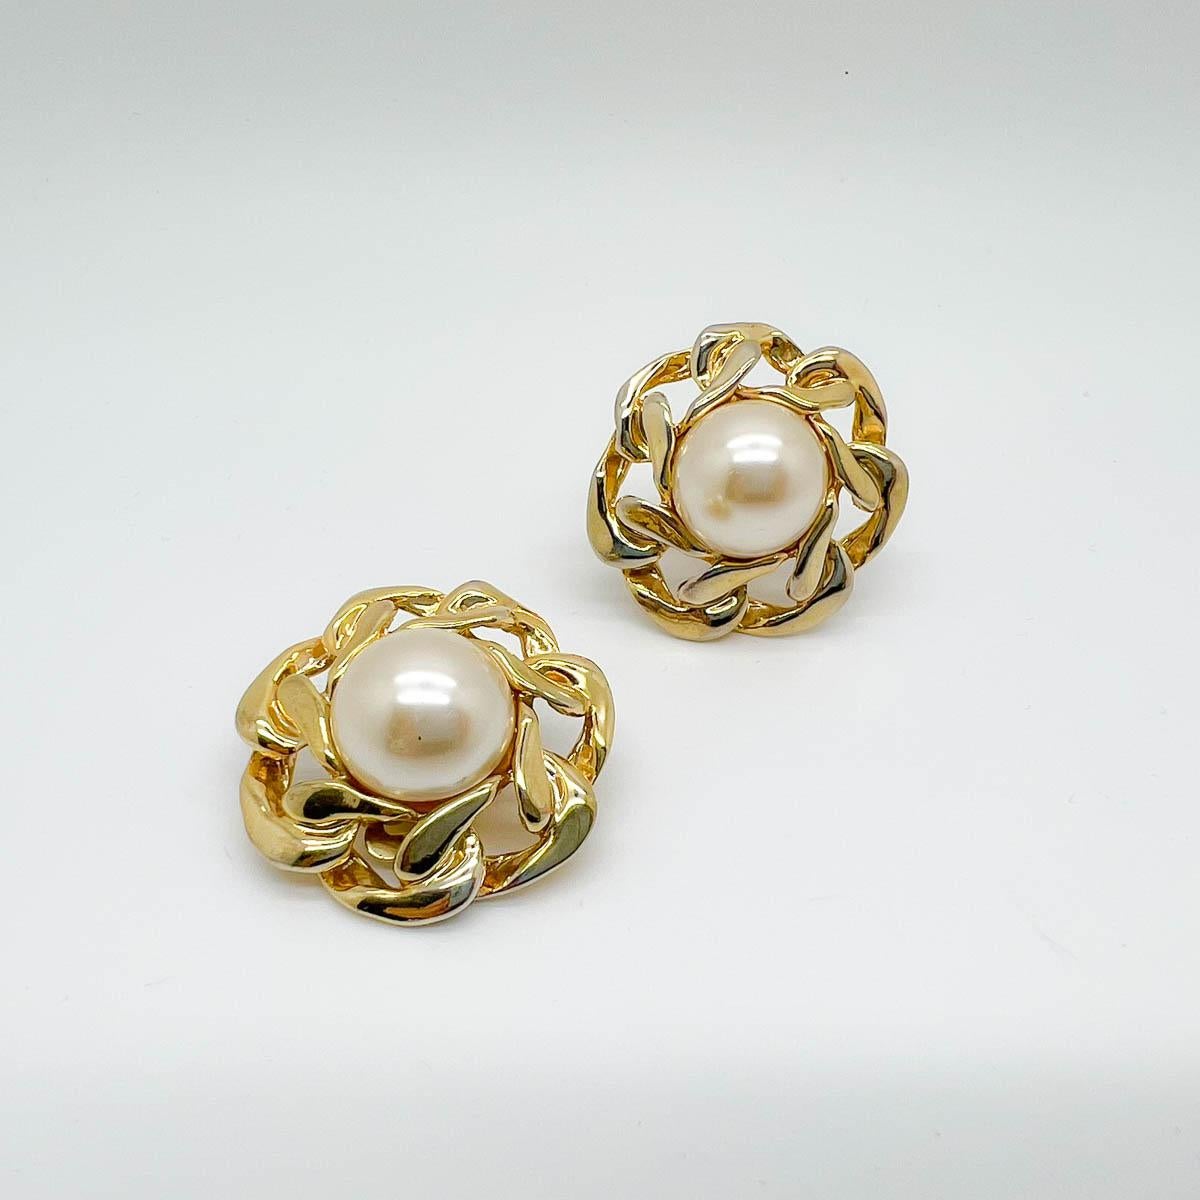 A pair of Vintage Pearl Link Earrings. A chunky link gallery around a large lustrous half pearl. The ultimate style accessory.

An unsigned beauty. A rare treasure. Just because a jewel doesn’t carry a designer name, doesn’t mean it isn't coveted.